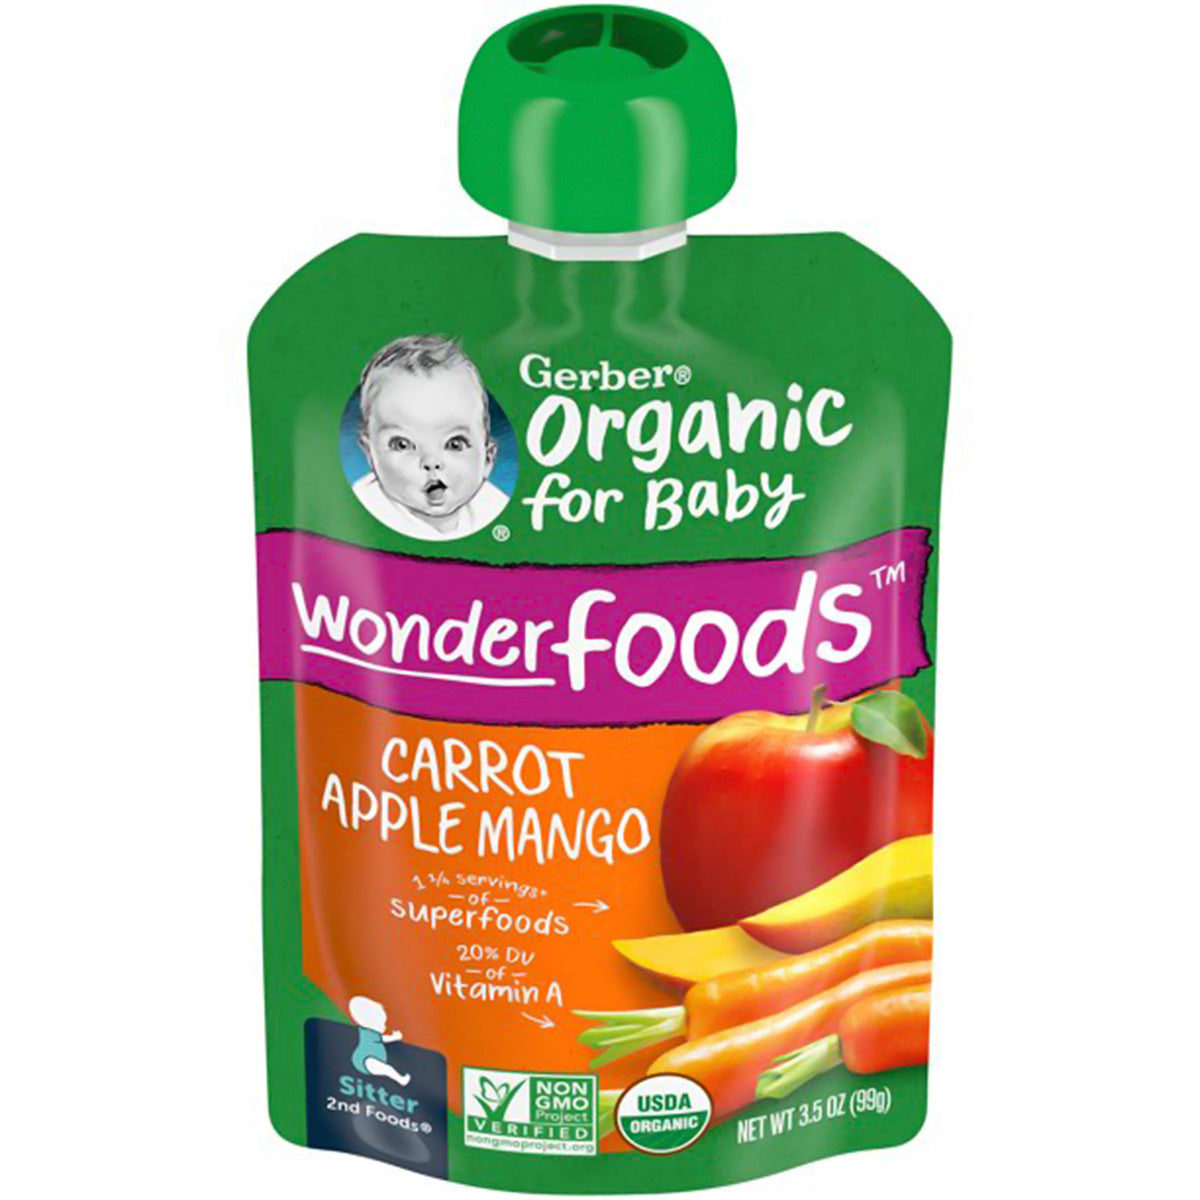 Gerber Organic for Baby, 2nd Foods for Sitter, 99g (3.5oz) - Carrots, Apples & Mangoes